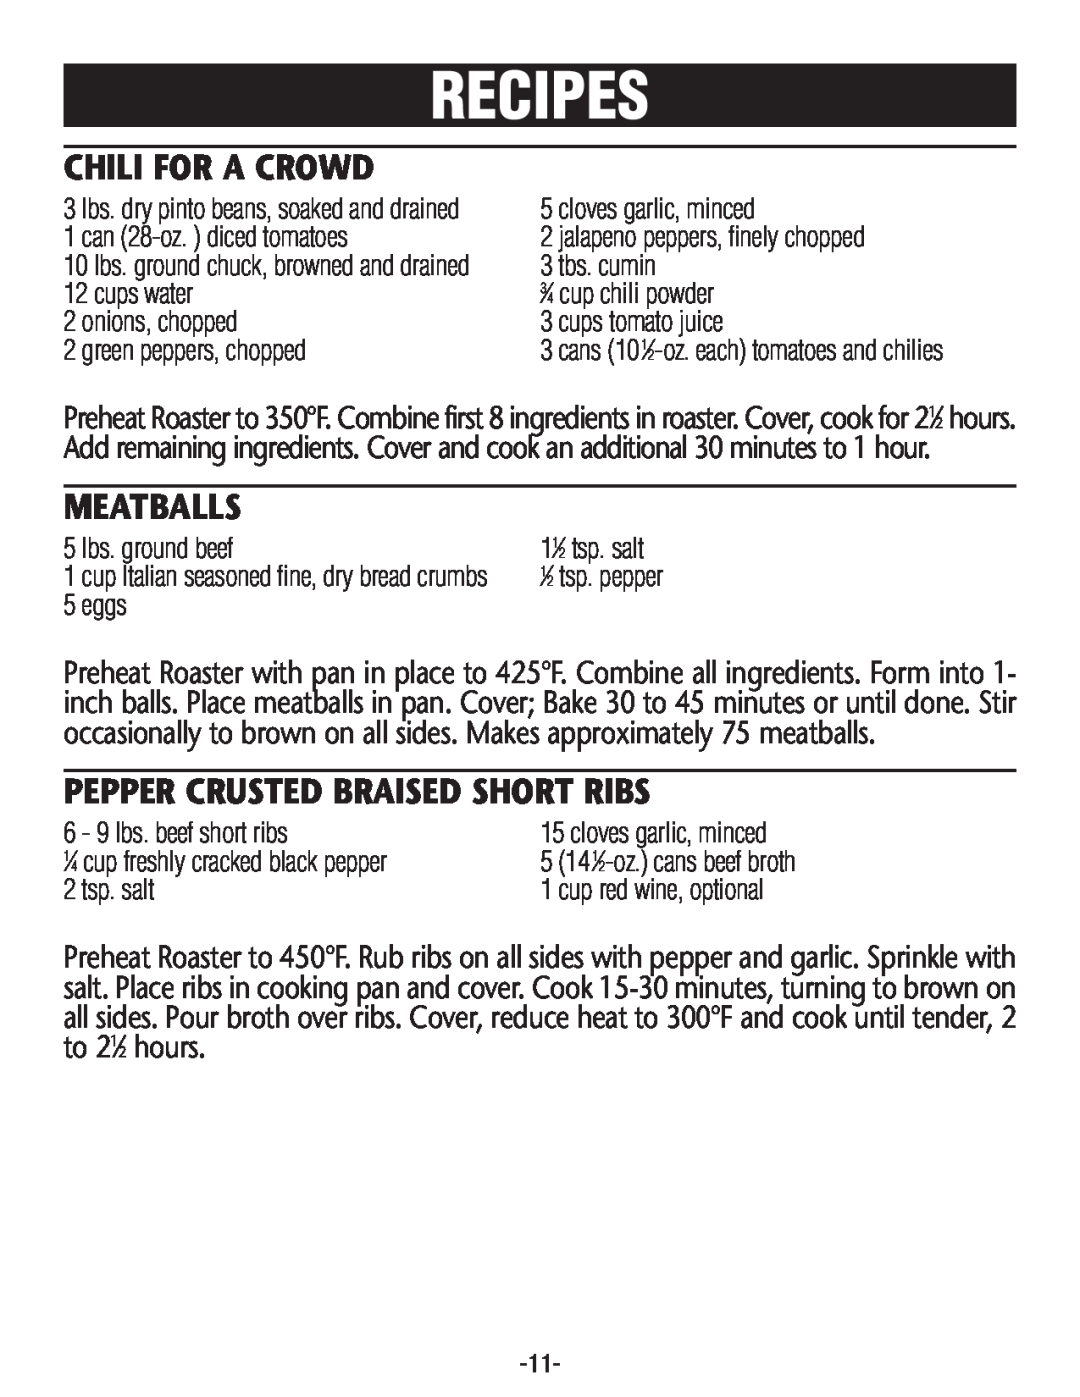 Rival R0180BR-C, R0188BR manual Chili For A Crowd, Meatballs, Pepper Crusted Braised Short Ribs, Recipes 